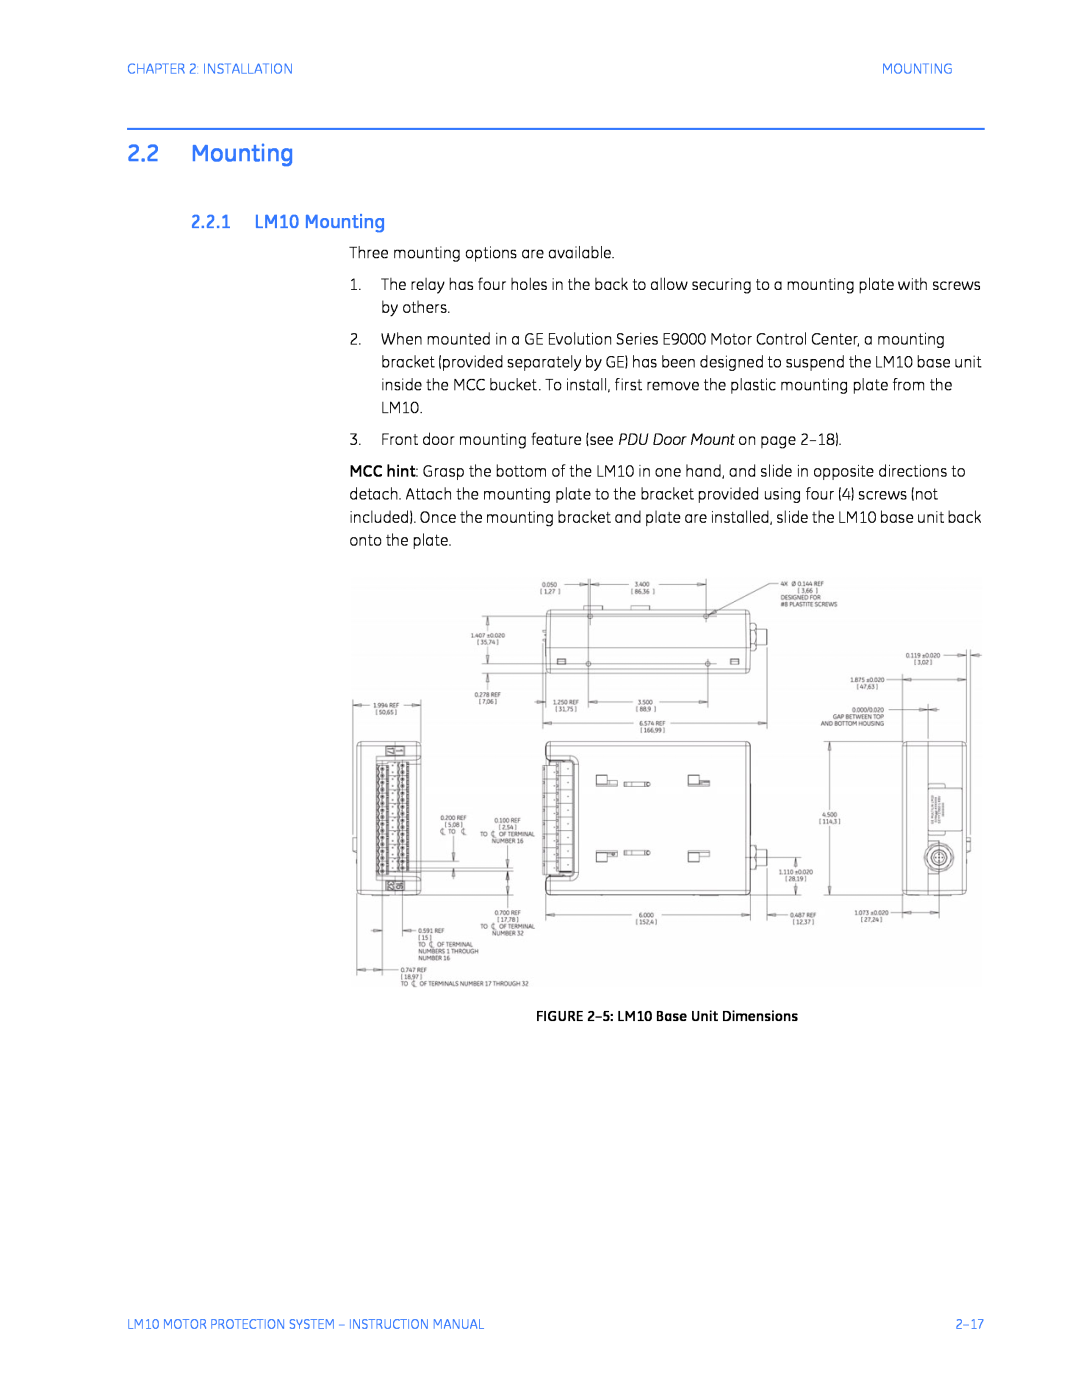 GE Motor Protection System instruction manual 2.2.1 LM10 Mounting 